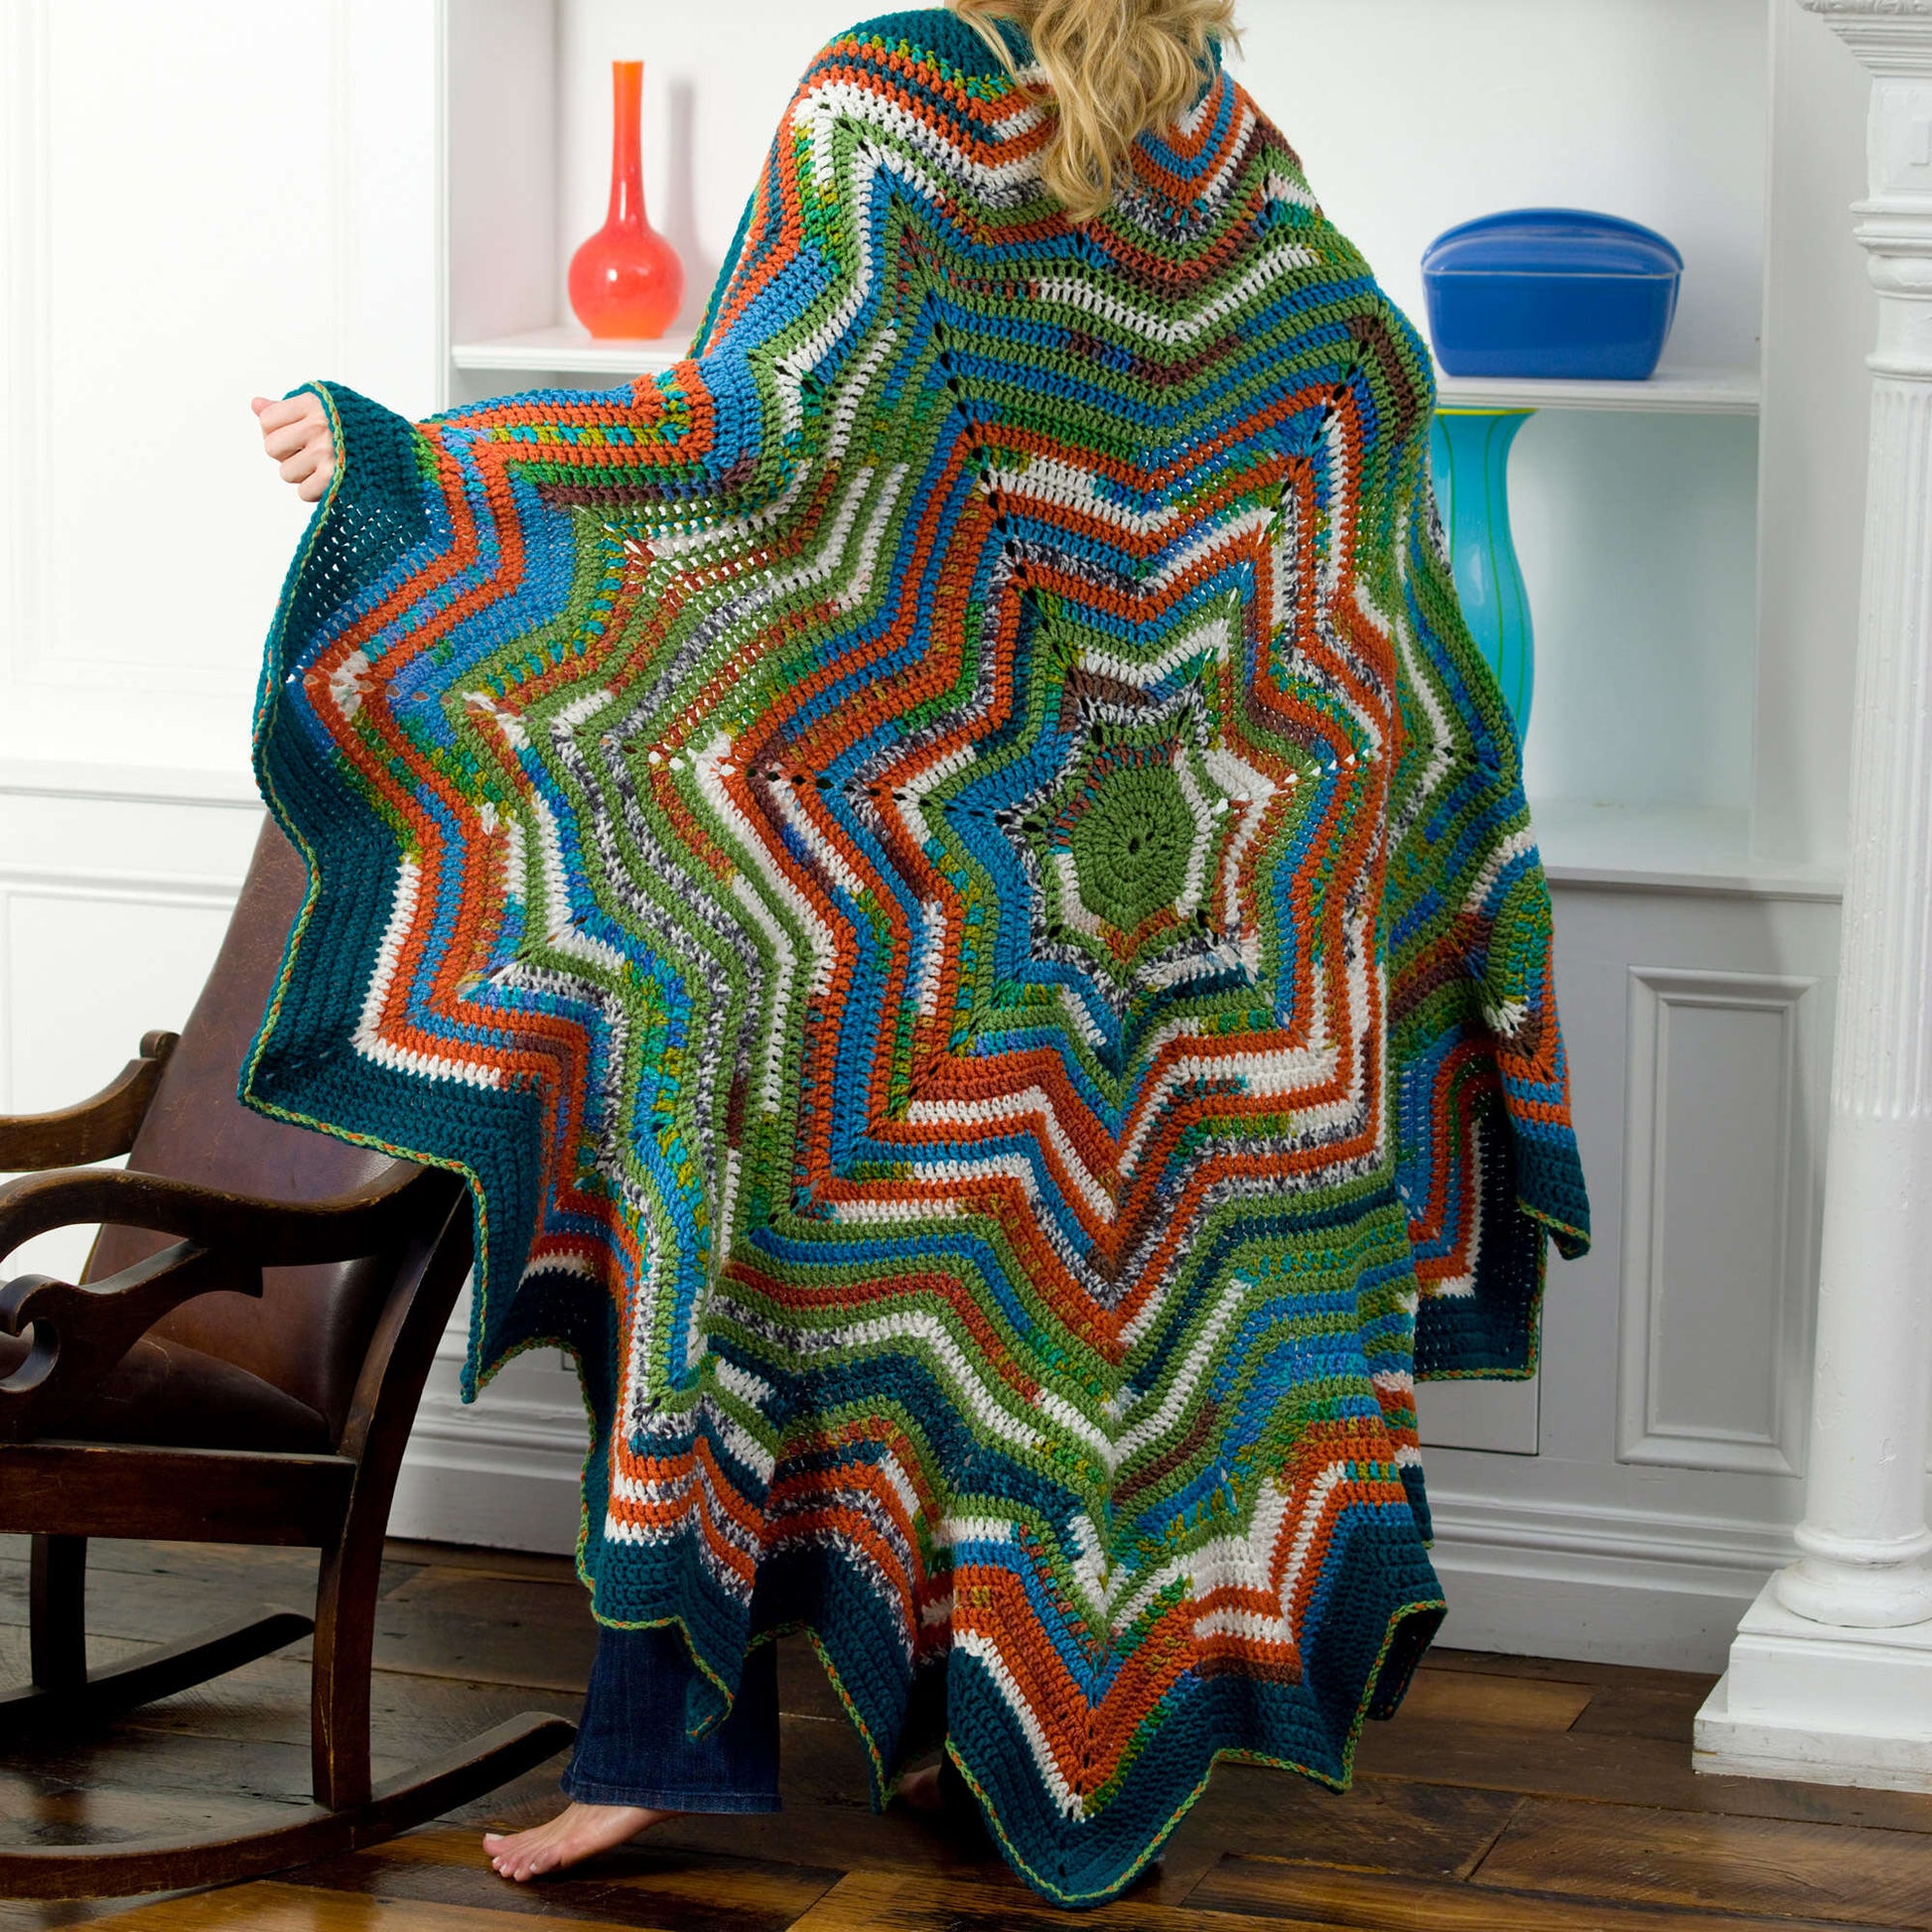 Free Red Heart 7 Point Star Throw Crochet Pattern